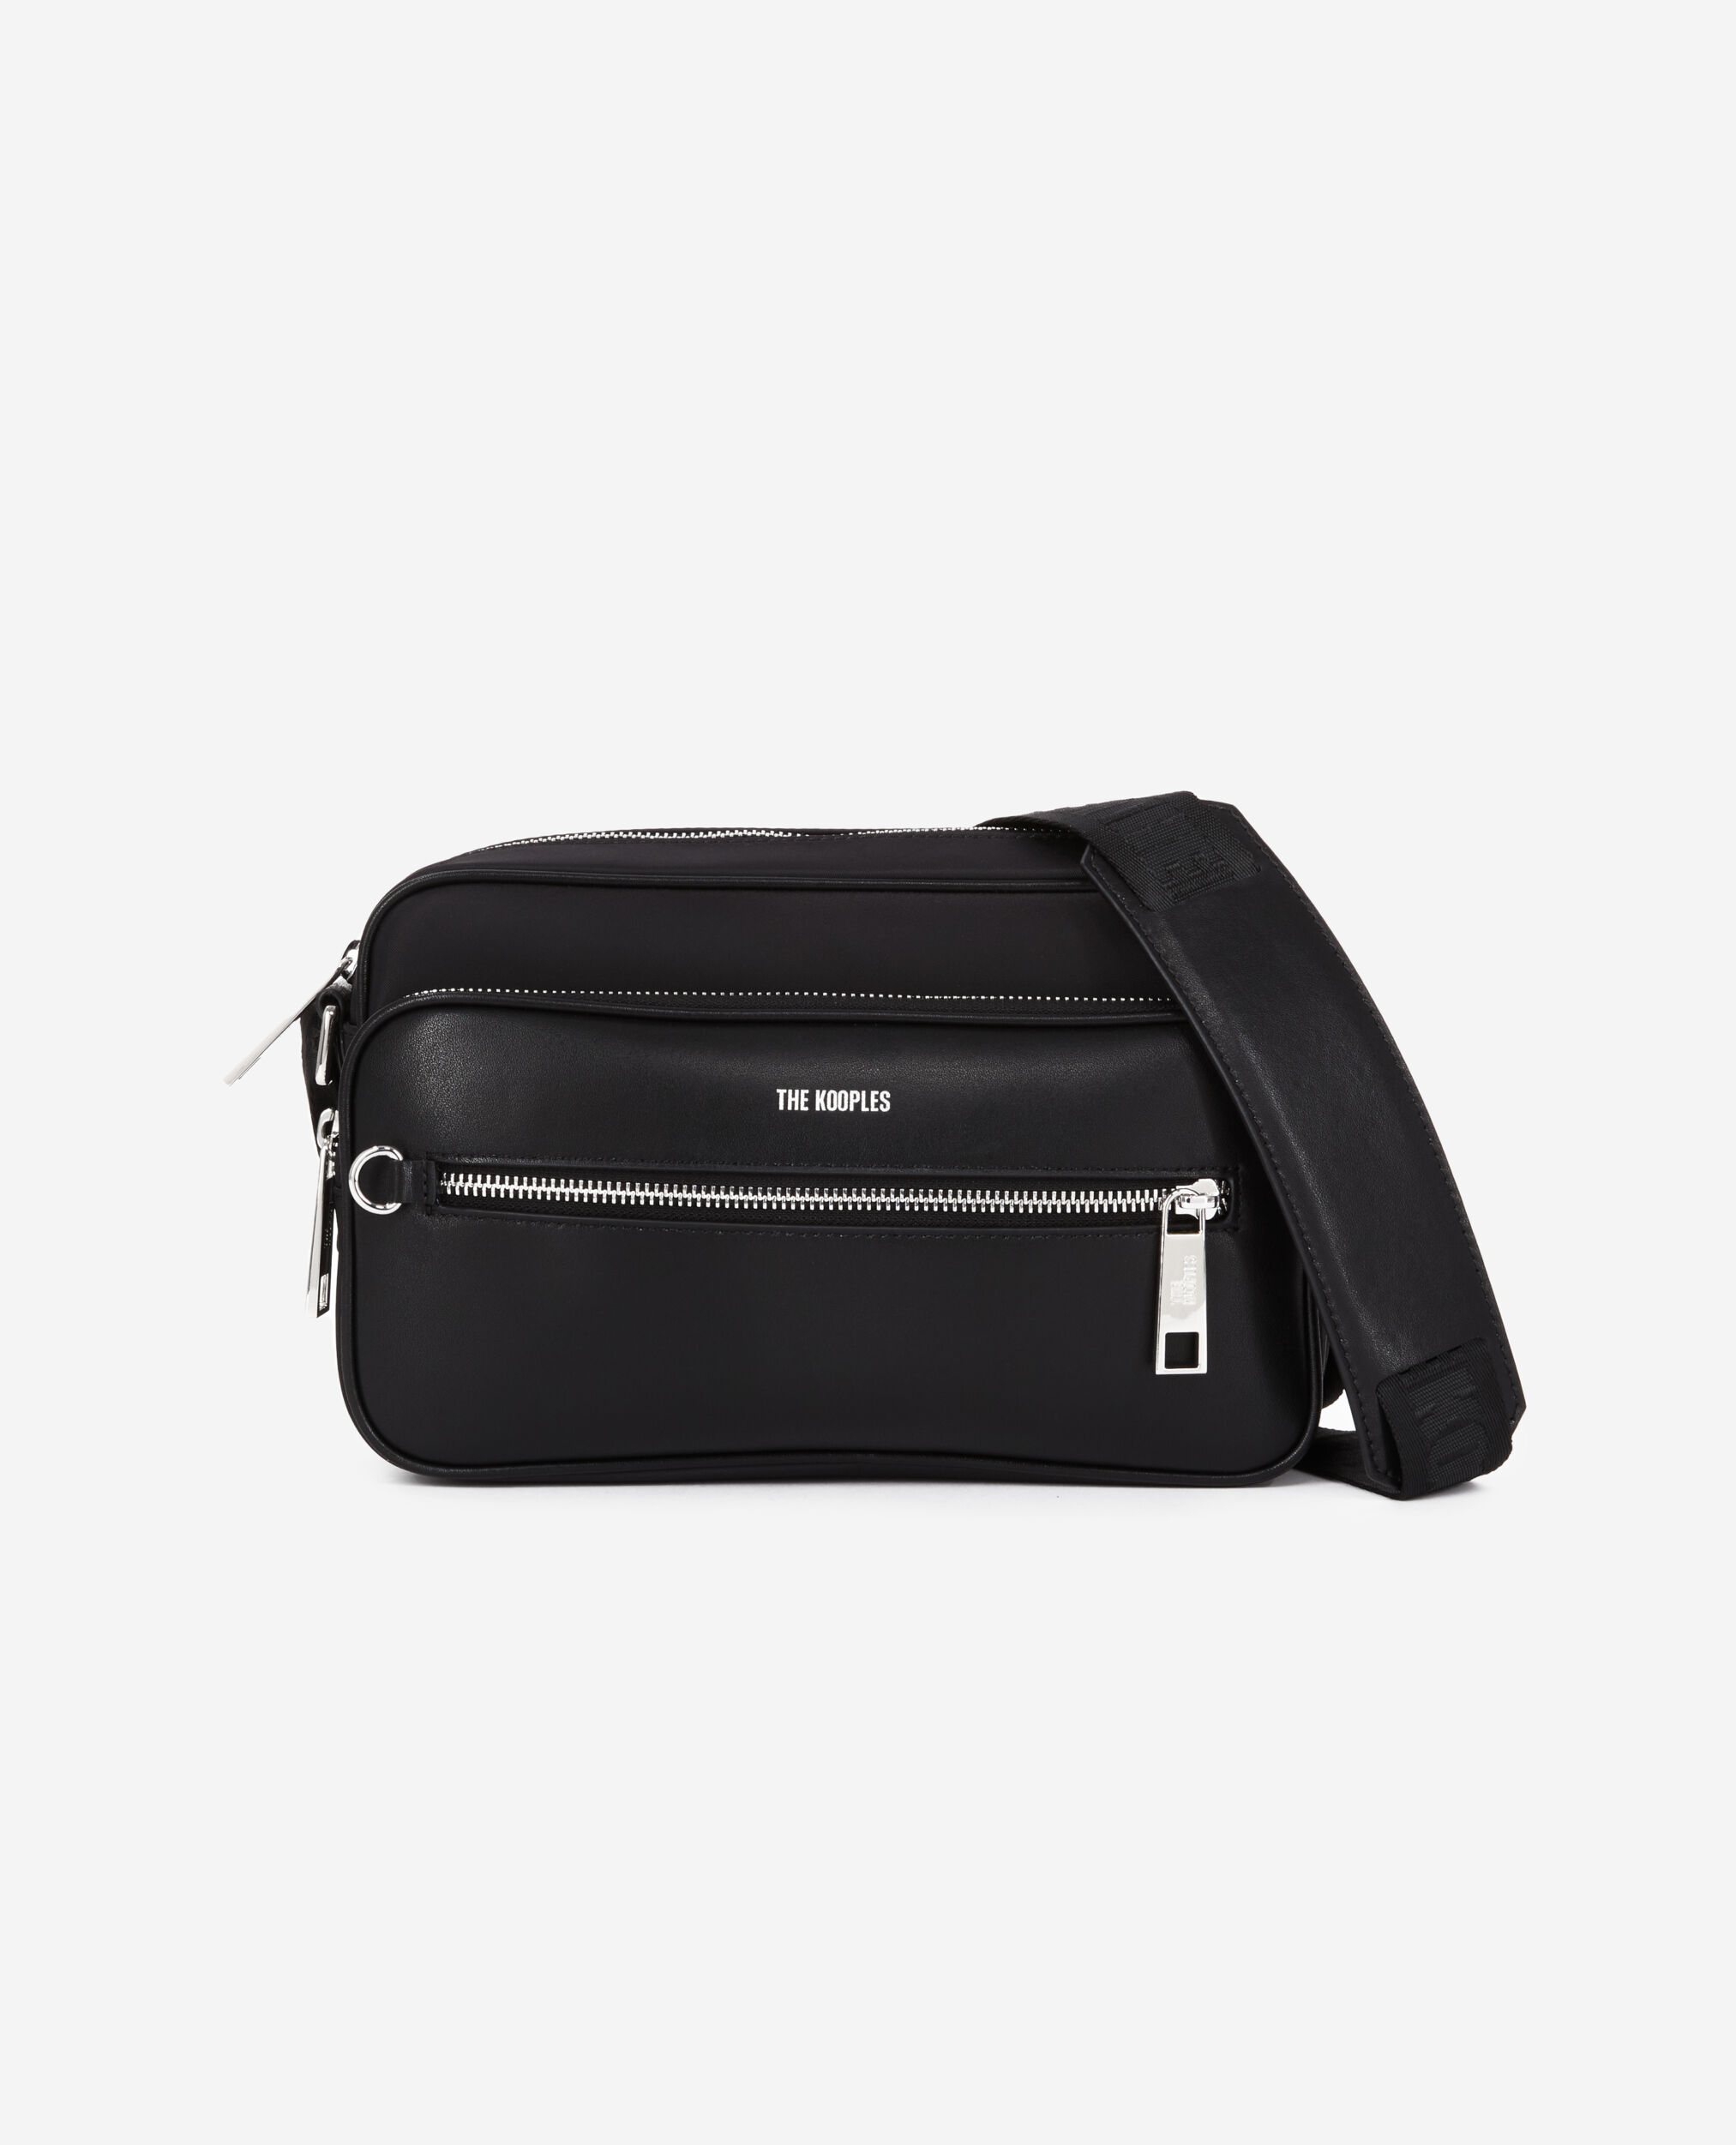 See all : Bags Collection | The Kooples - UK